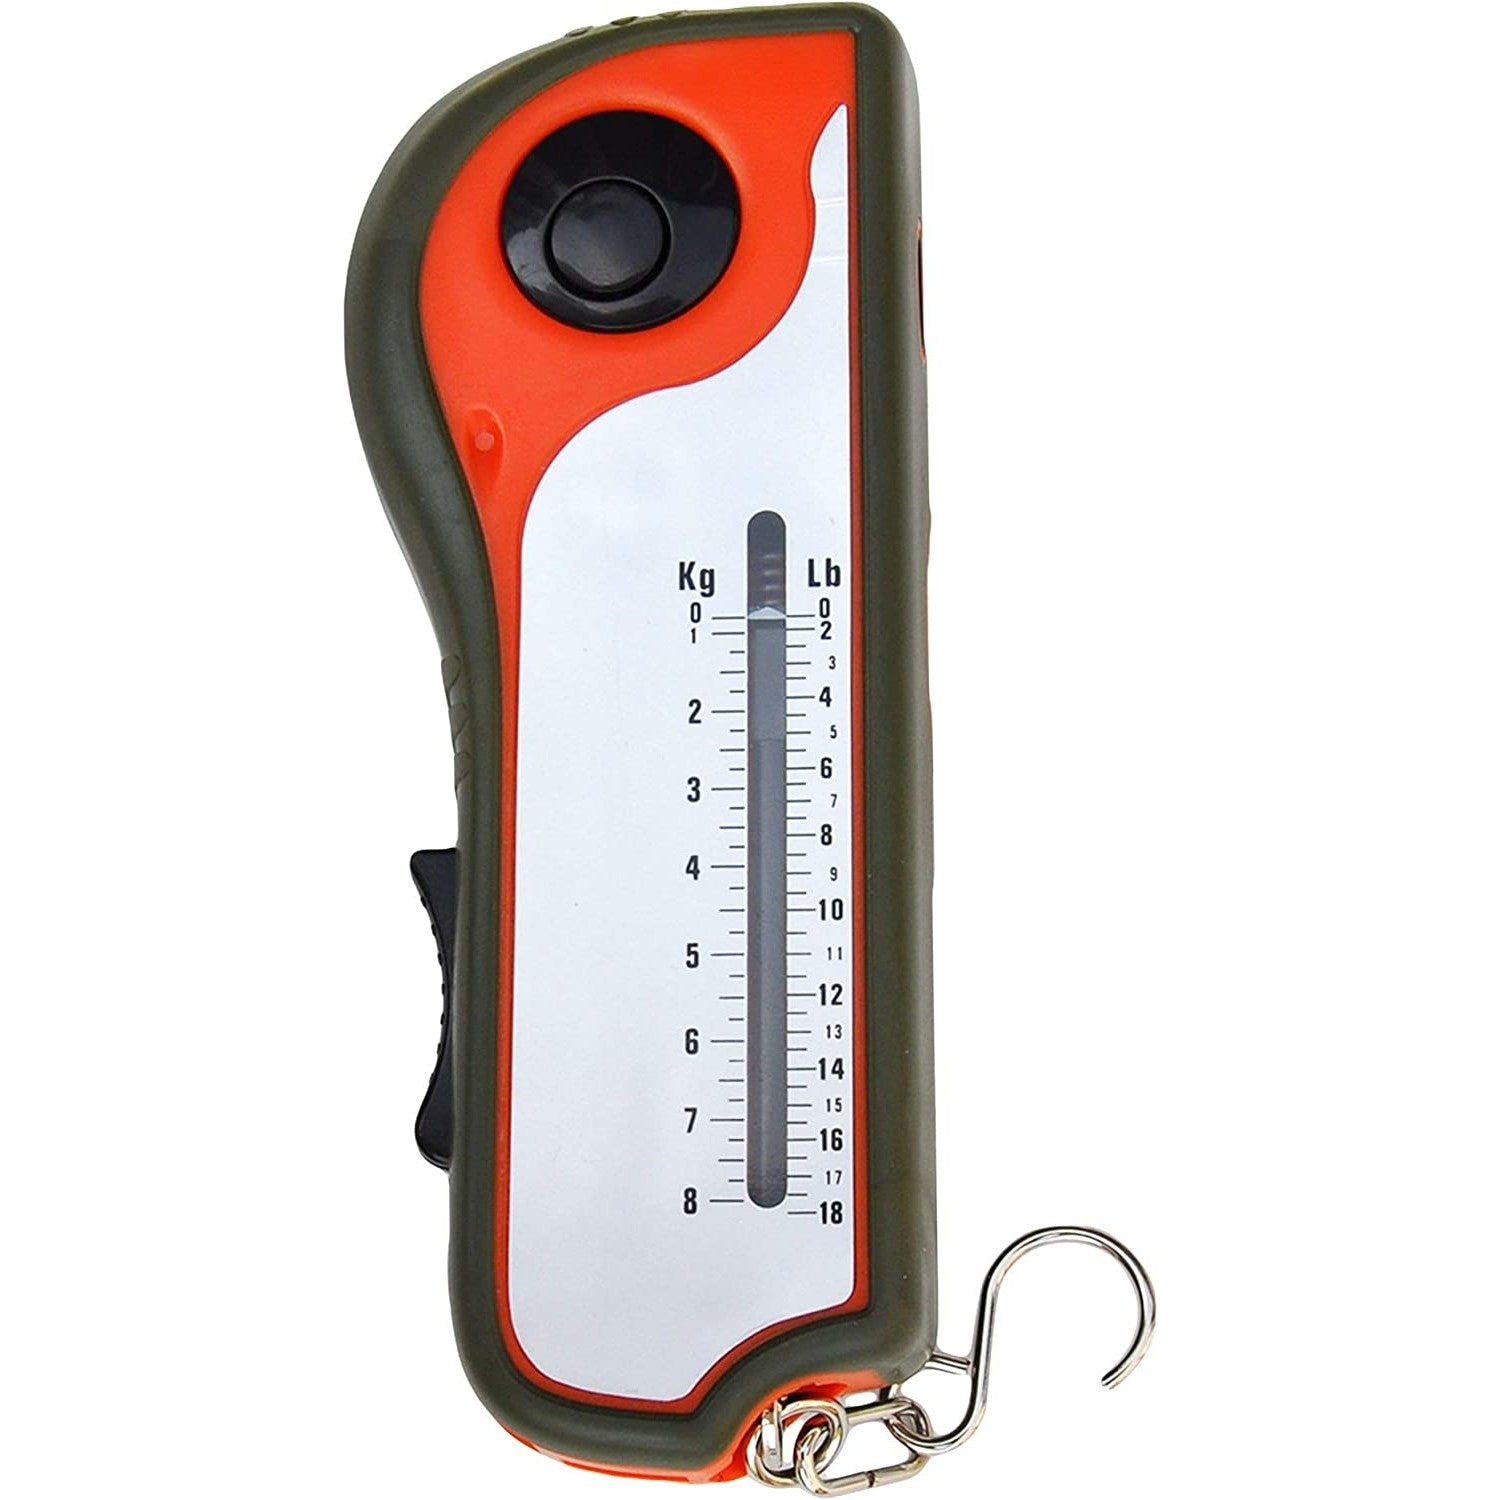 A close-up view of a 10-in-1 fishing multi-tool